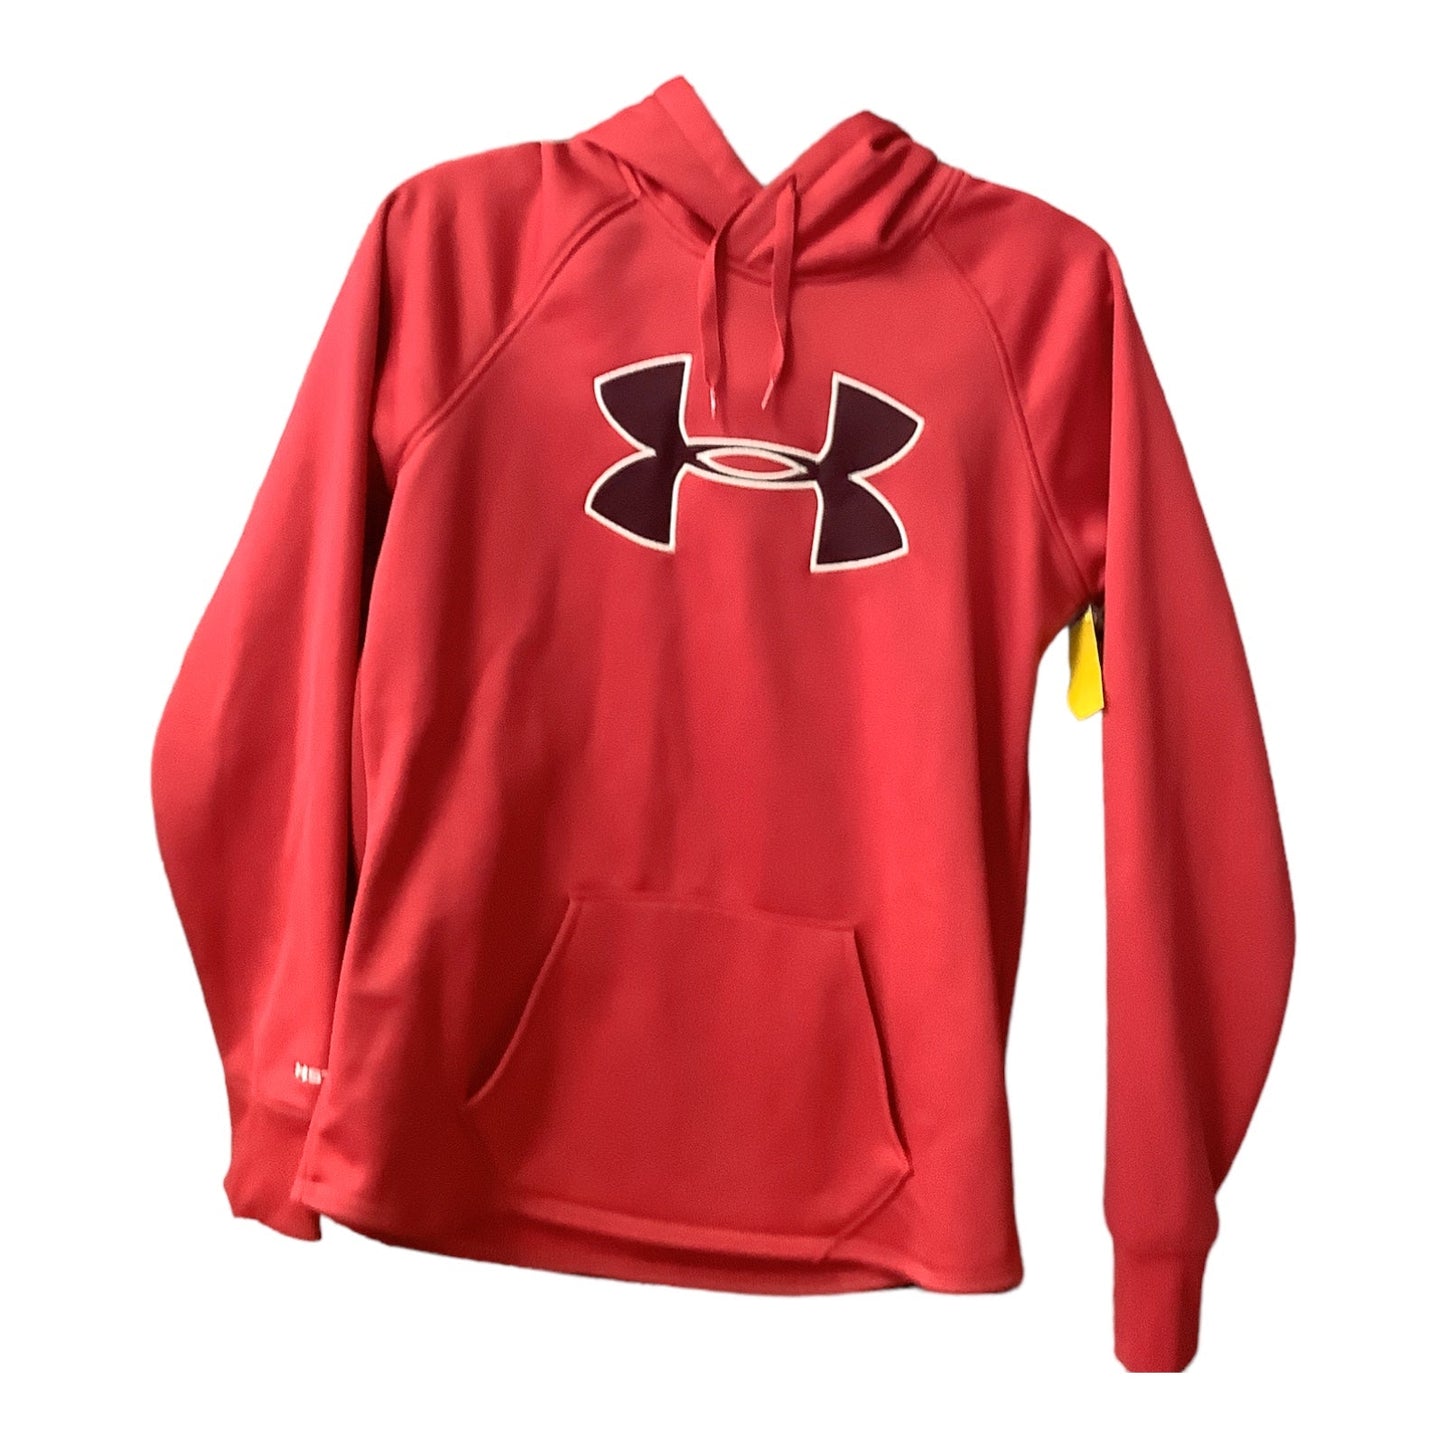 Athletic Sweatshirt Hoodie By Under Armour  Size: S